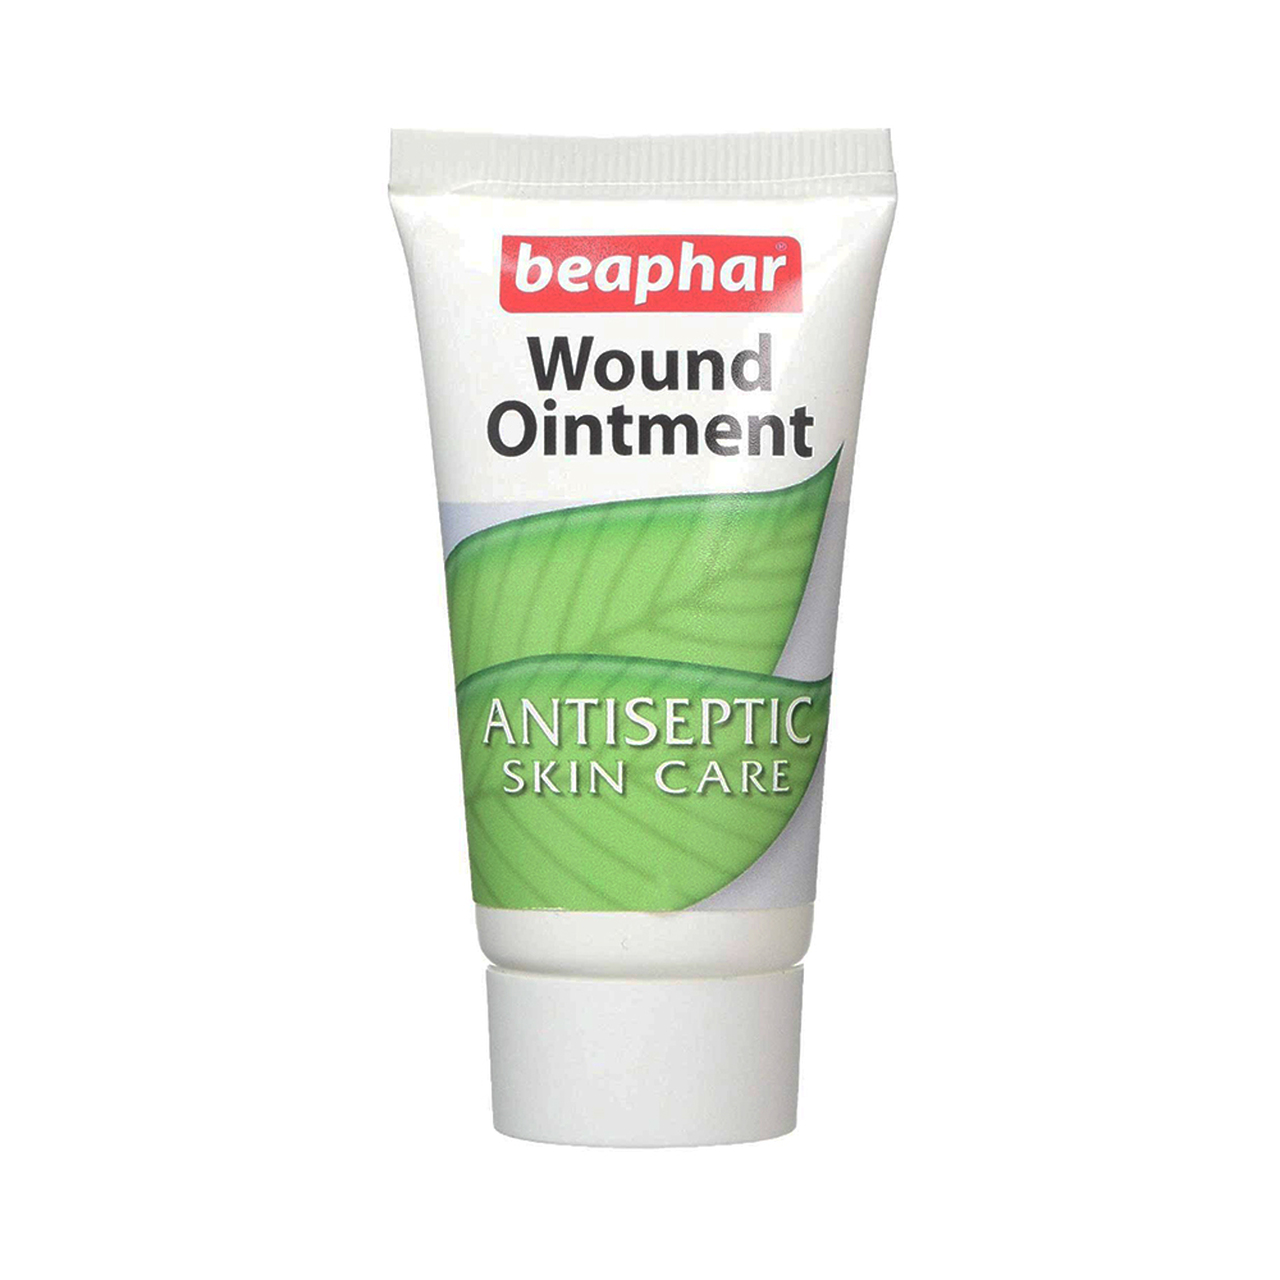 Beaphar-Wound-Ointment-Antiseptic-Skin-Care-Cream-for-Dogs-Cats-and-Birds-30ml-94378.1599350541.jpg